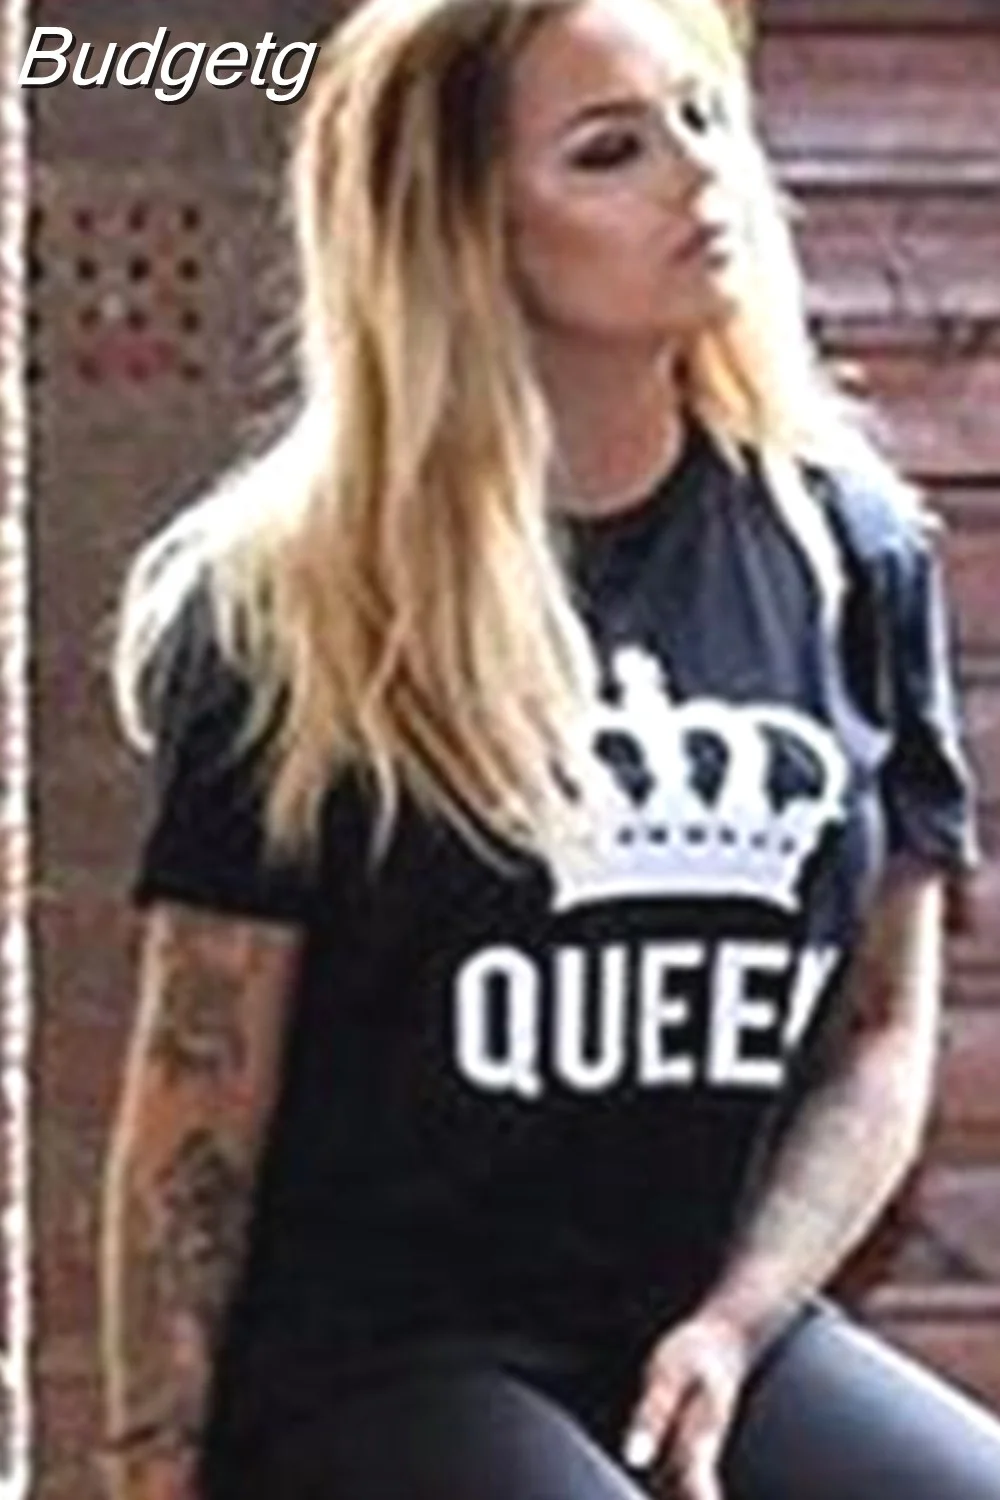 Budgetg NEW Funny KING QUEEN Letter Printed Black Tshirts OMSJ Summer Casual Cotton Short Sleeve Tees Tops Brand Loose Couple Tops